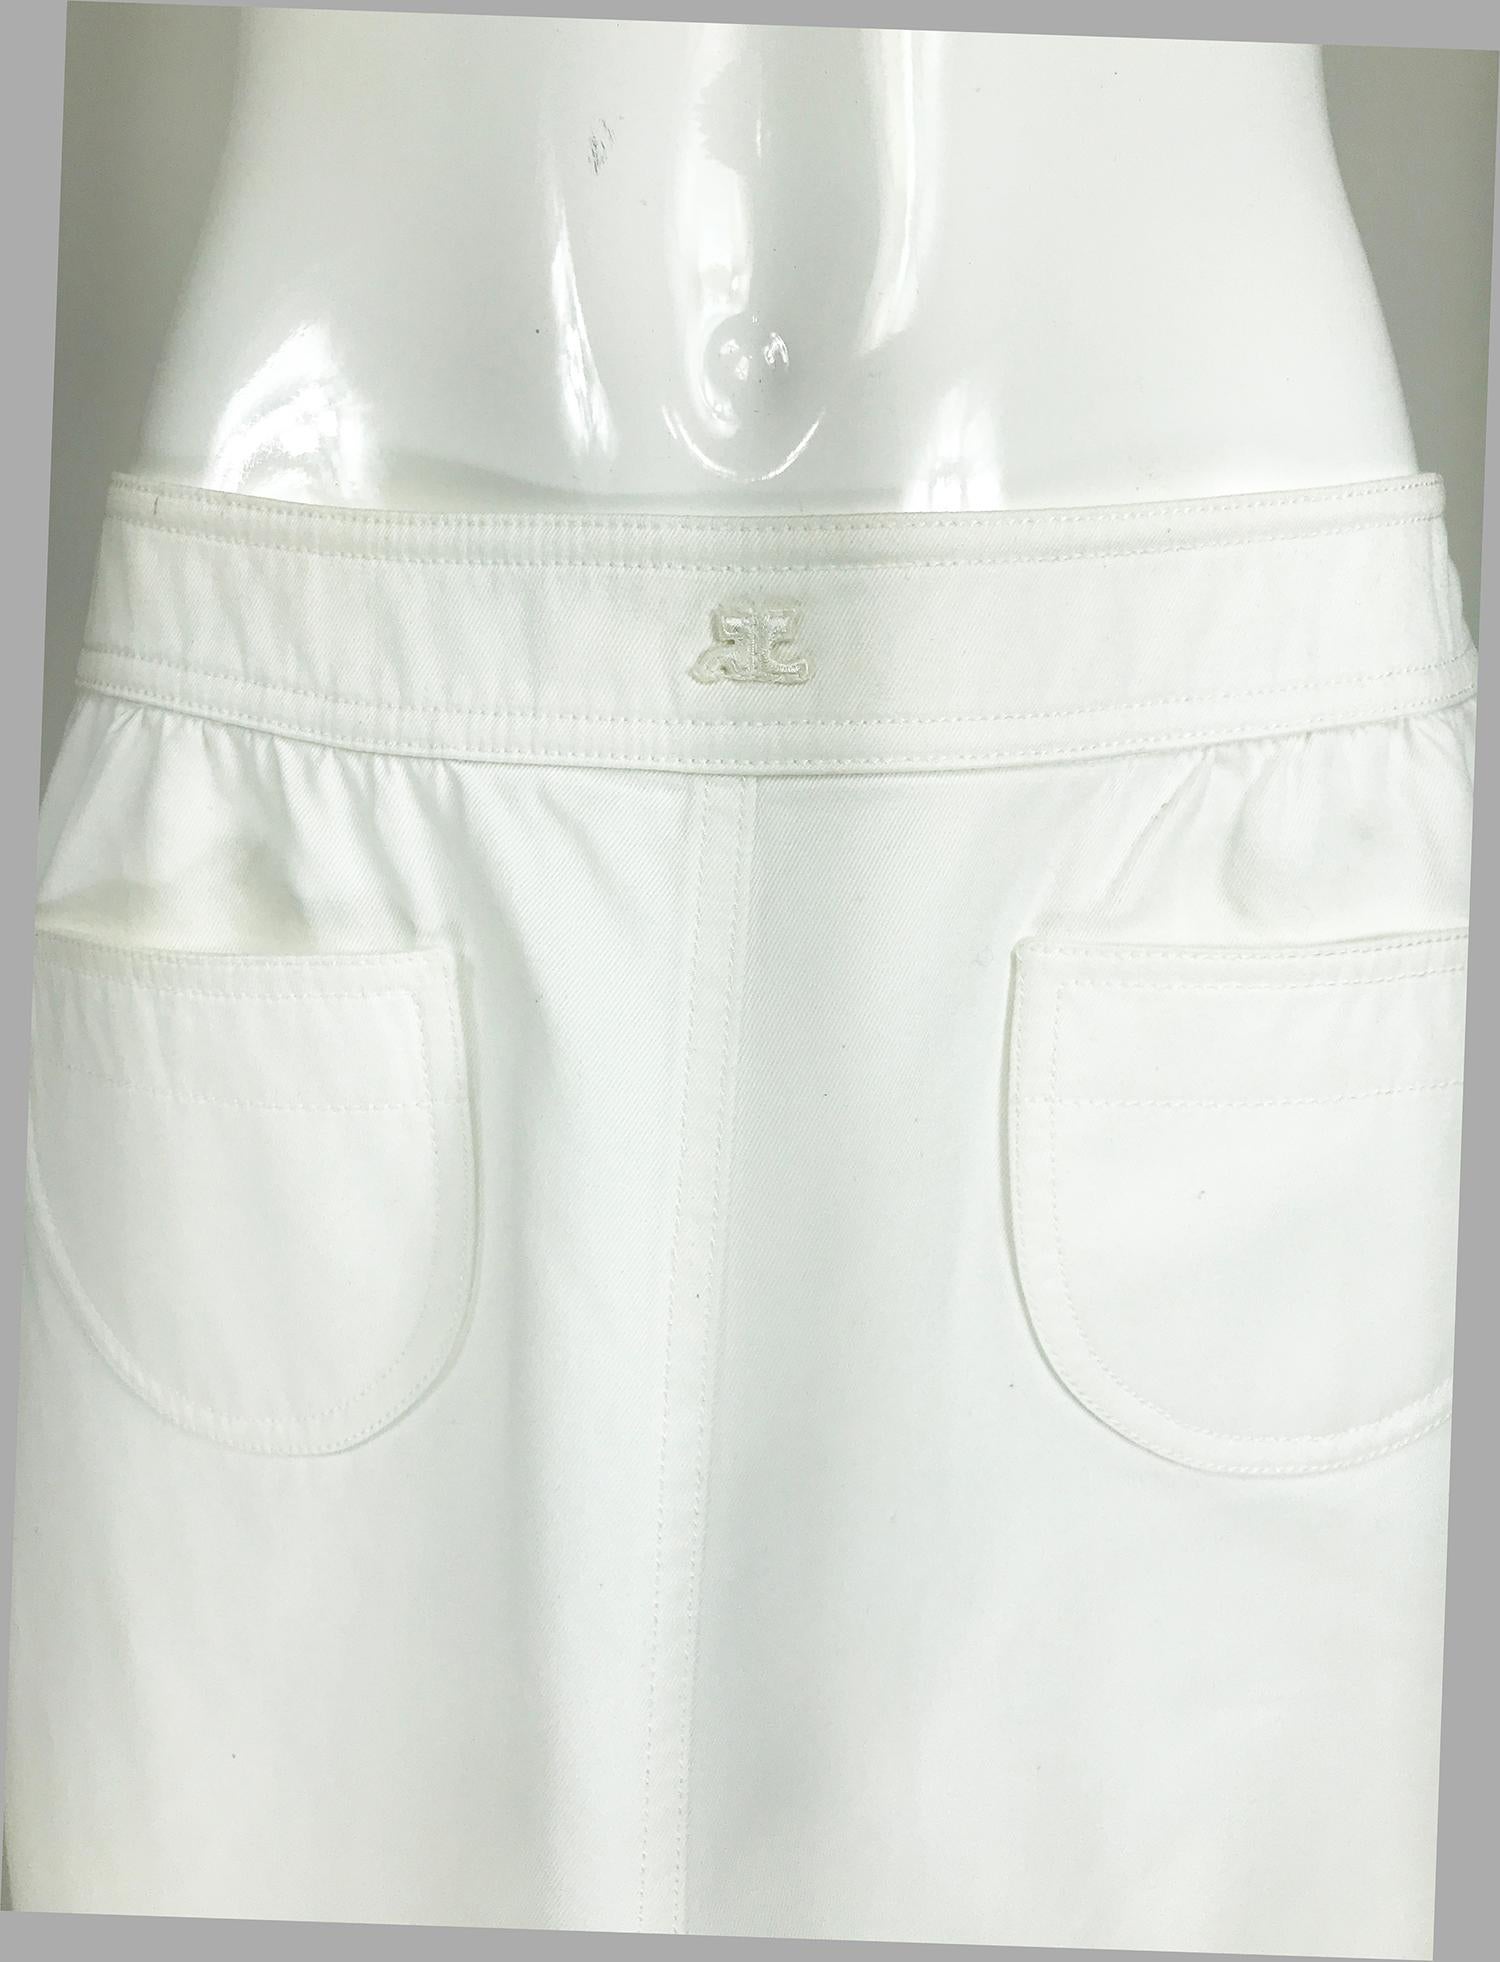 Vintage Courreges white cotton twill, pocket front skirt. Side zip skirt, has a contour shape waist band, with Courreges logo at the center front and closes with a white snap at the side. The skirt is lightly gathered below the waist band, two open